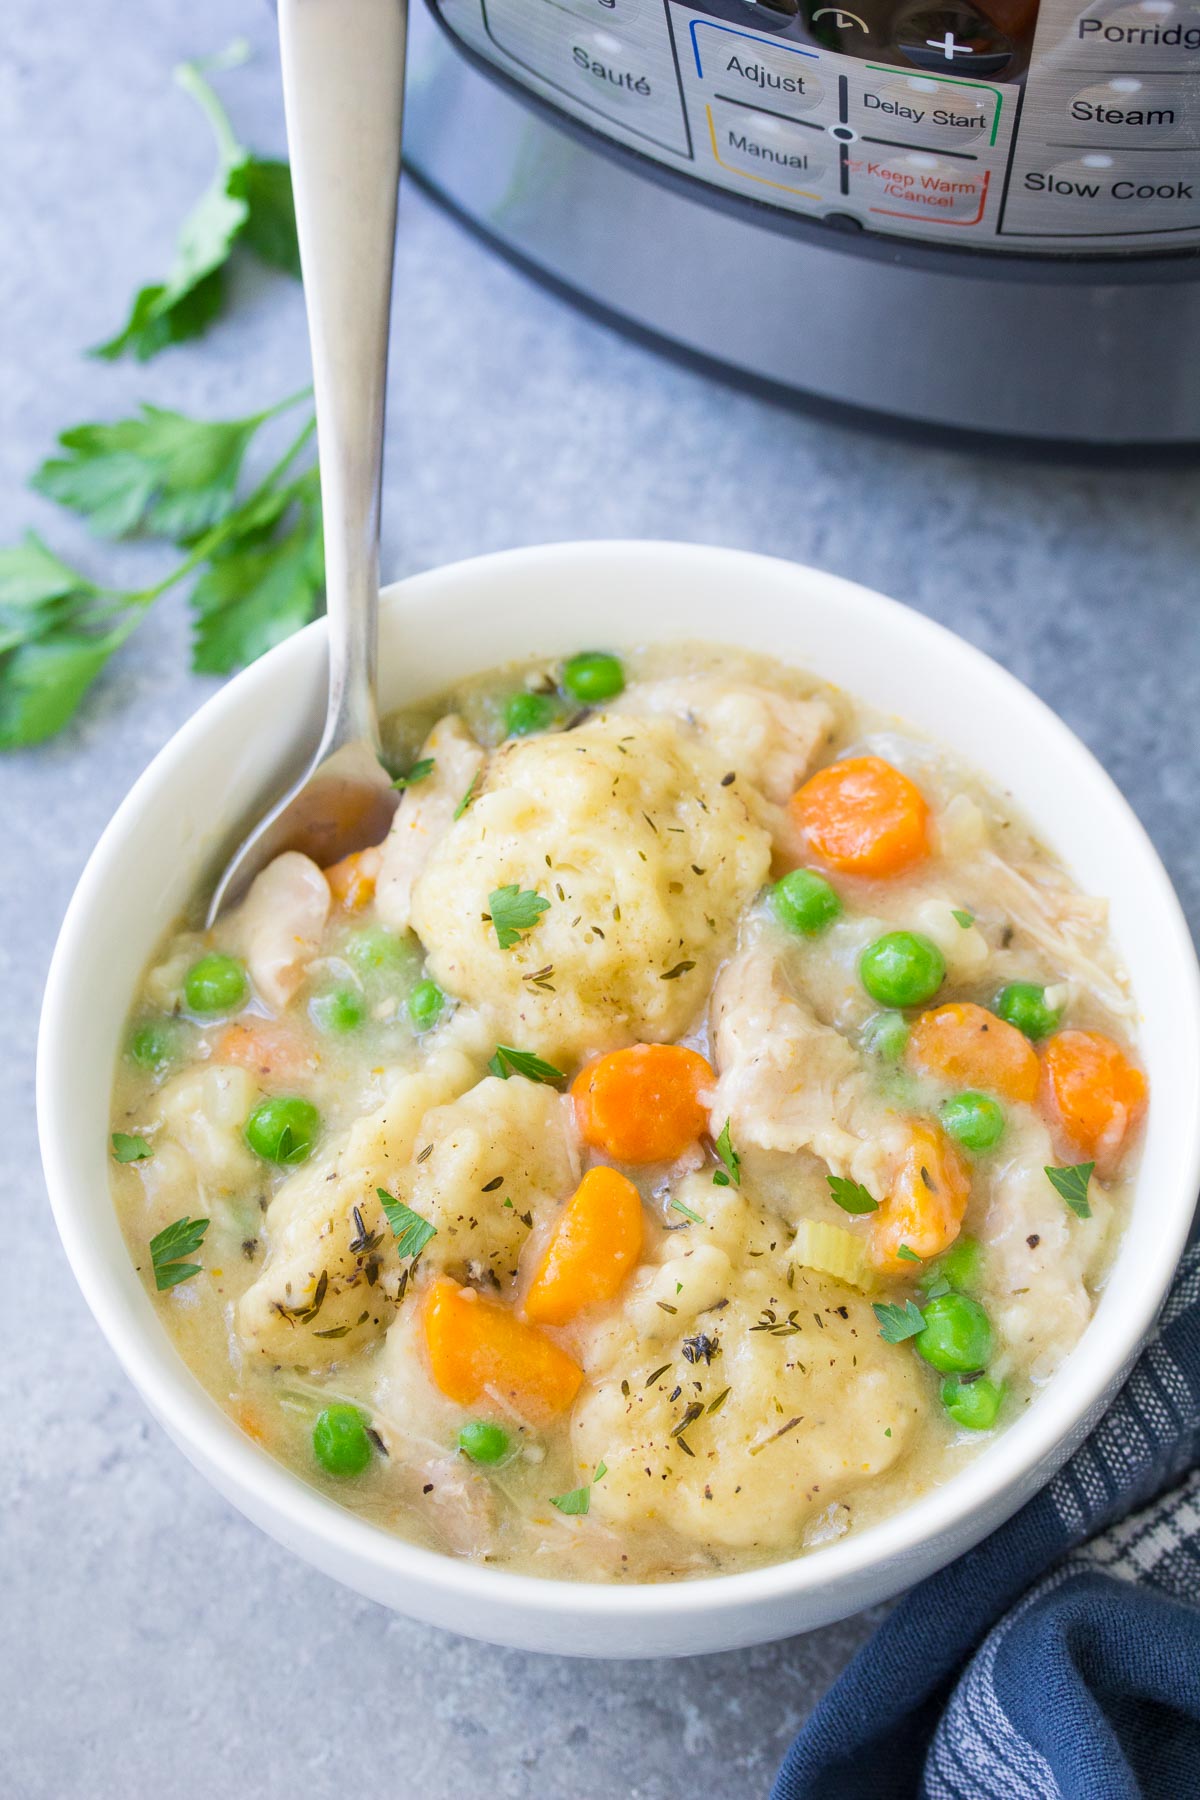 Place chicken and instant dumplings in a white bowl with a spoon.